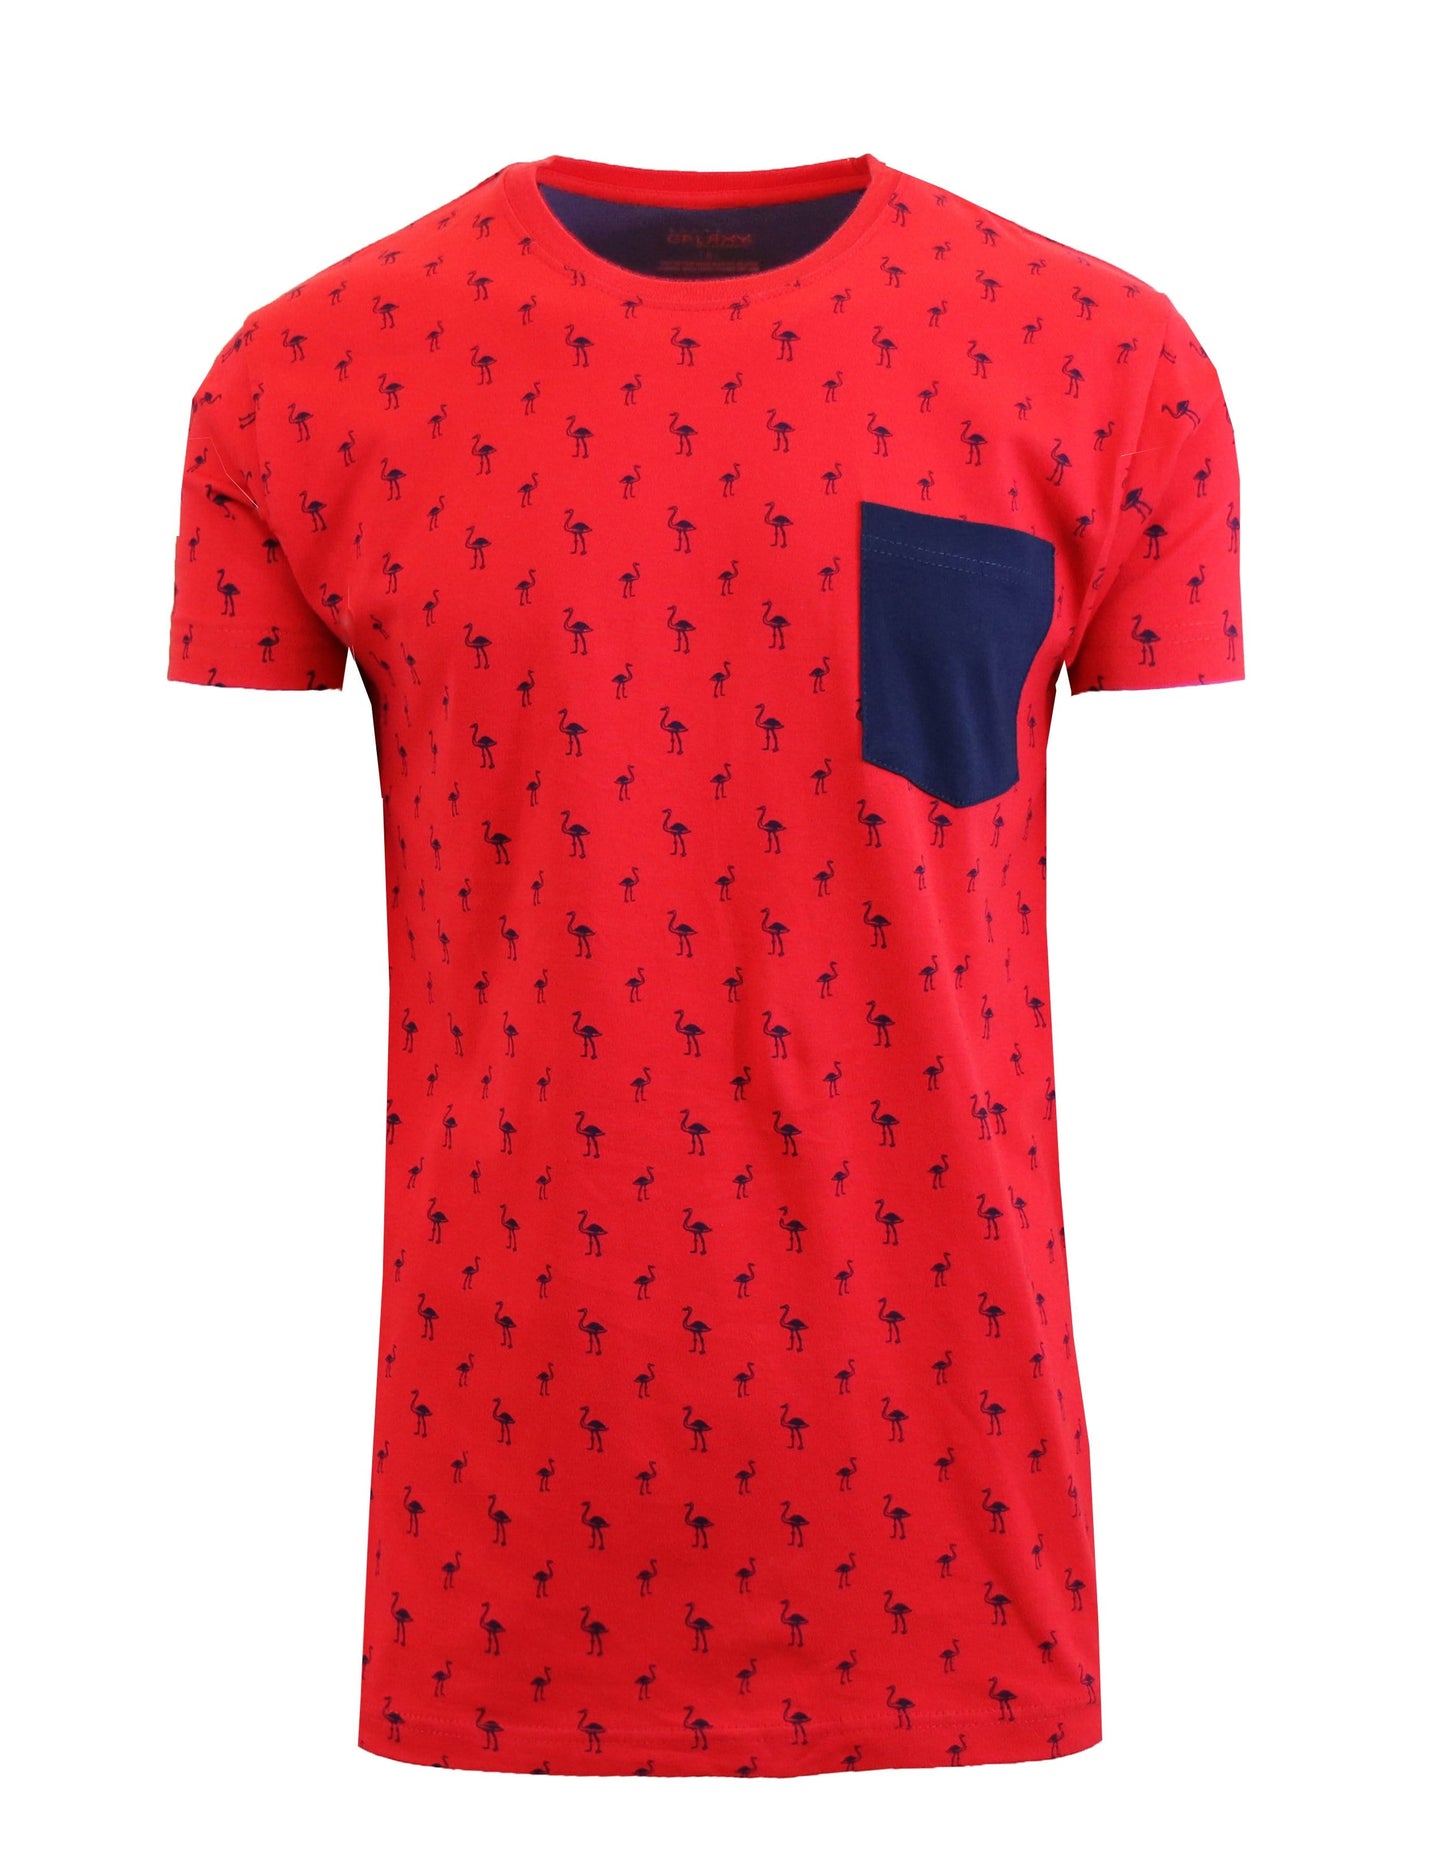 Men's Flamingo Printed Tee with Chest Pocket - GalaxybyHarvic